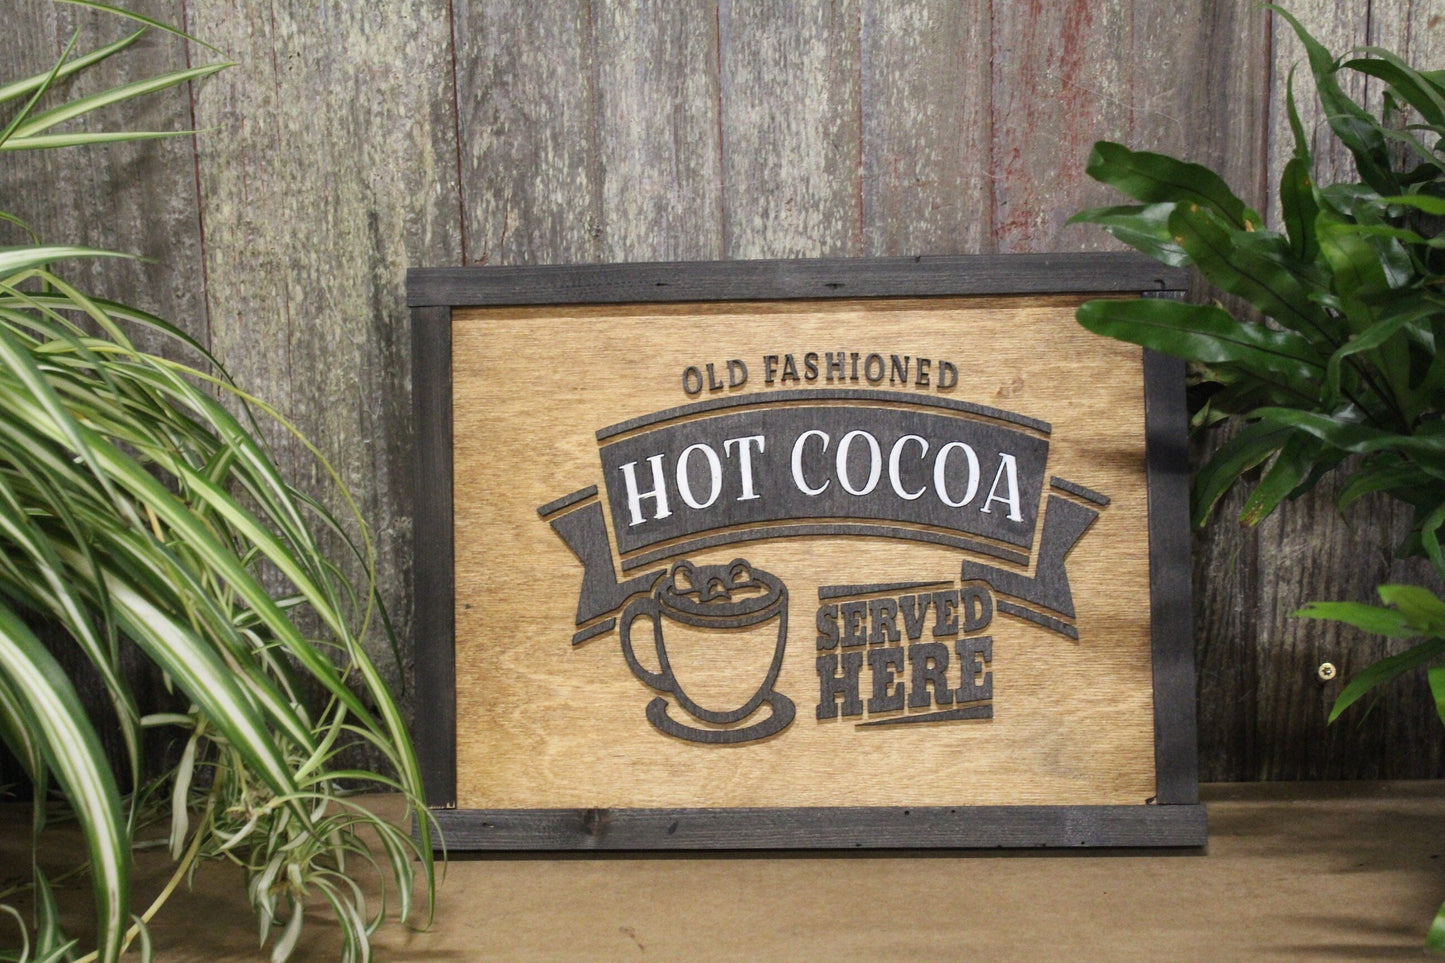 Old Fashioned Hot Cocoa Served Here 3D Wood Sign Holiday Decor Winter Warm Cup Mug Rustive Primative Christmas Cold Brr Festive Advertising